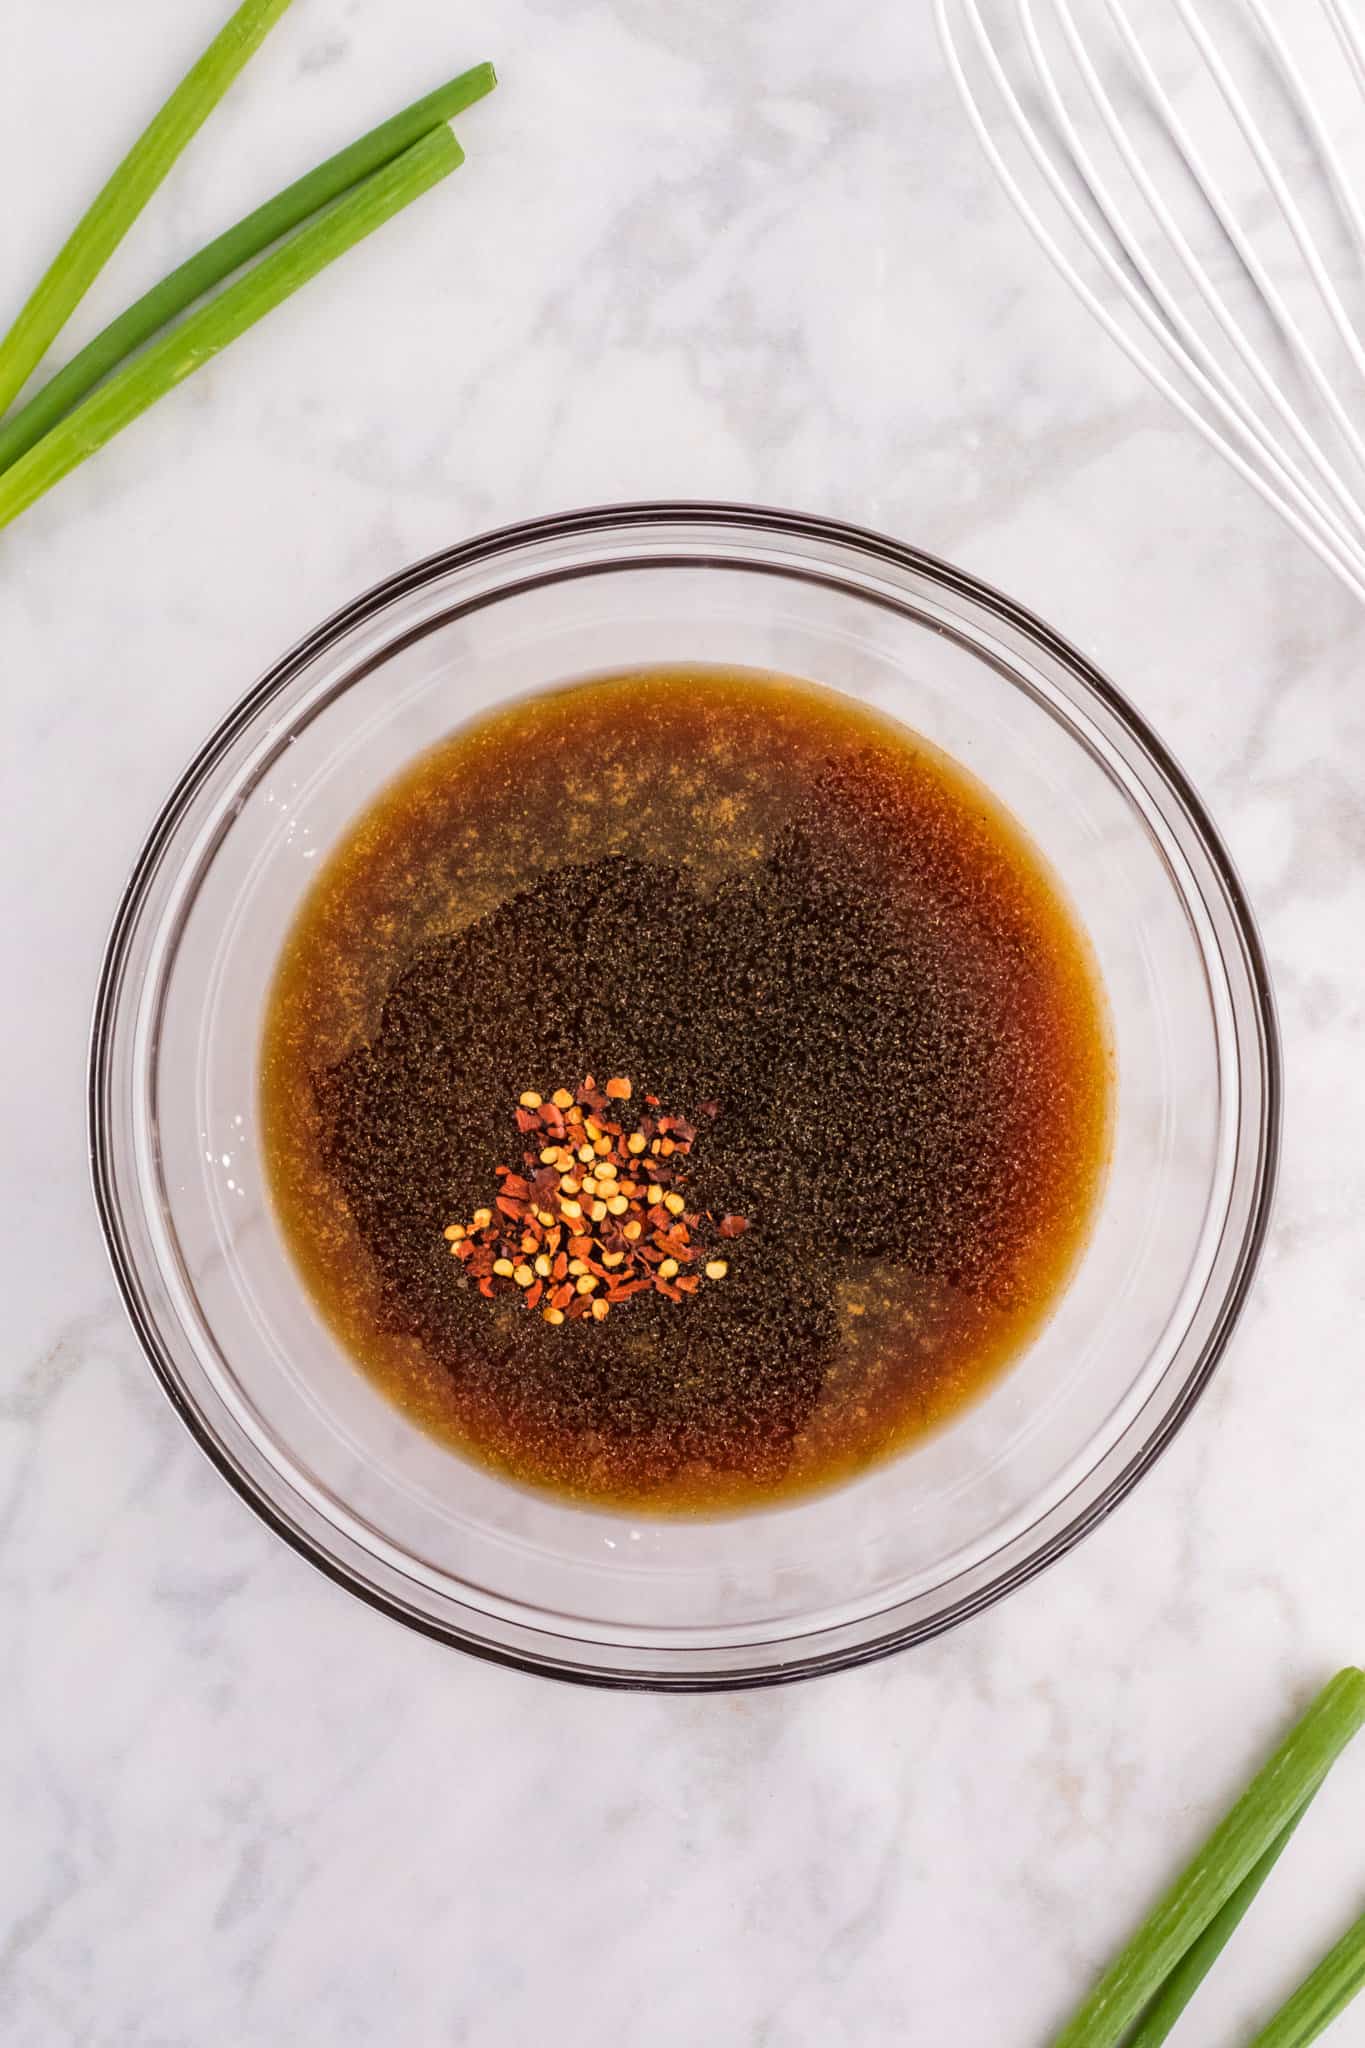 soy sauce, brown sugar and spices in a mixing bowl